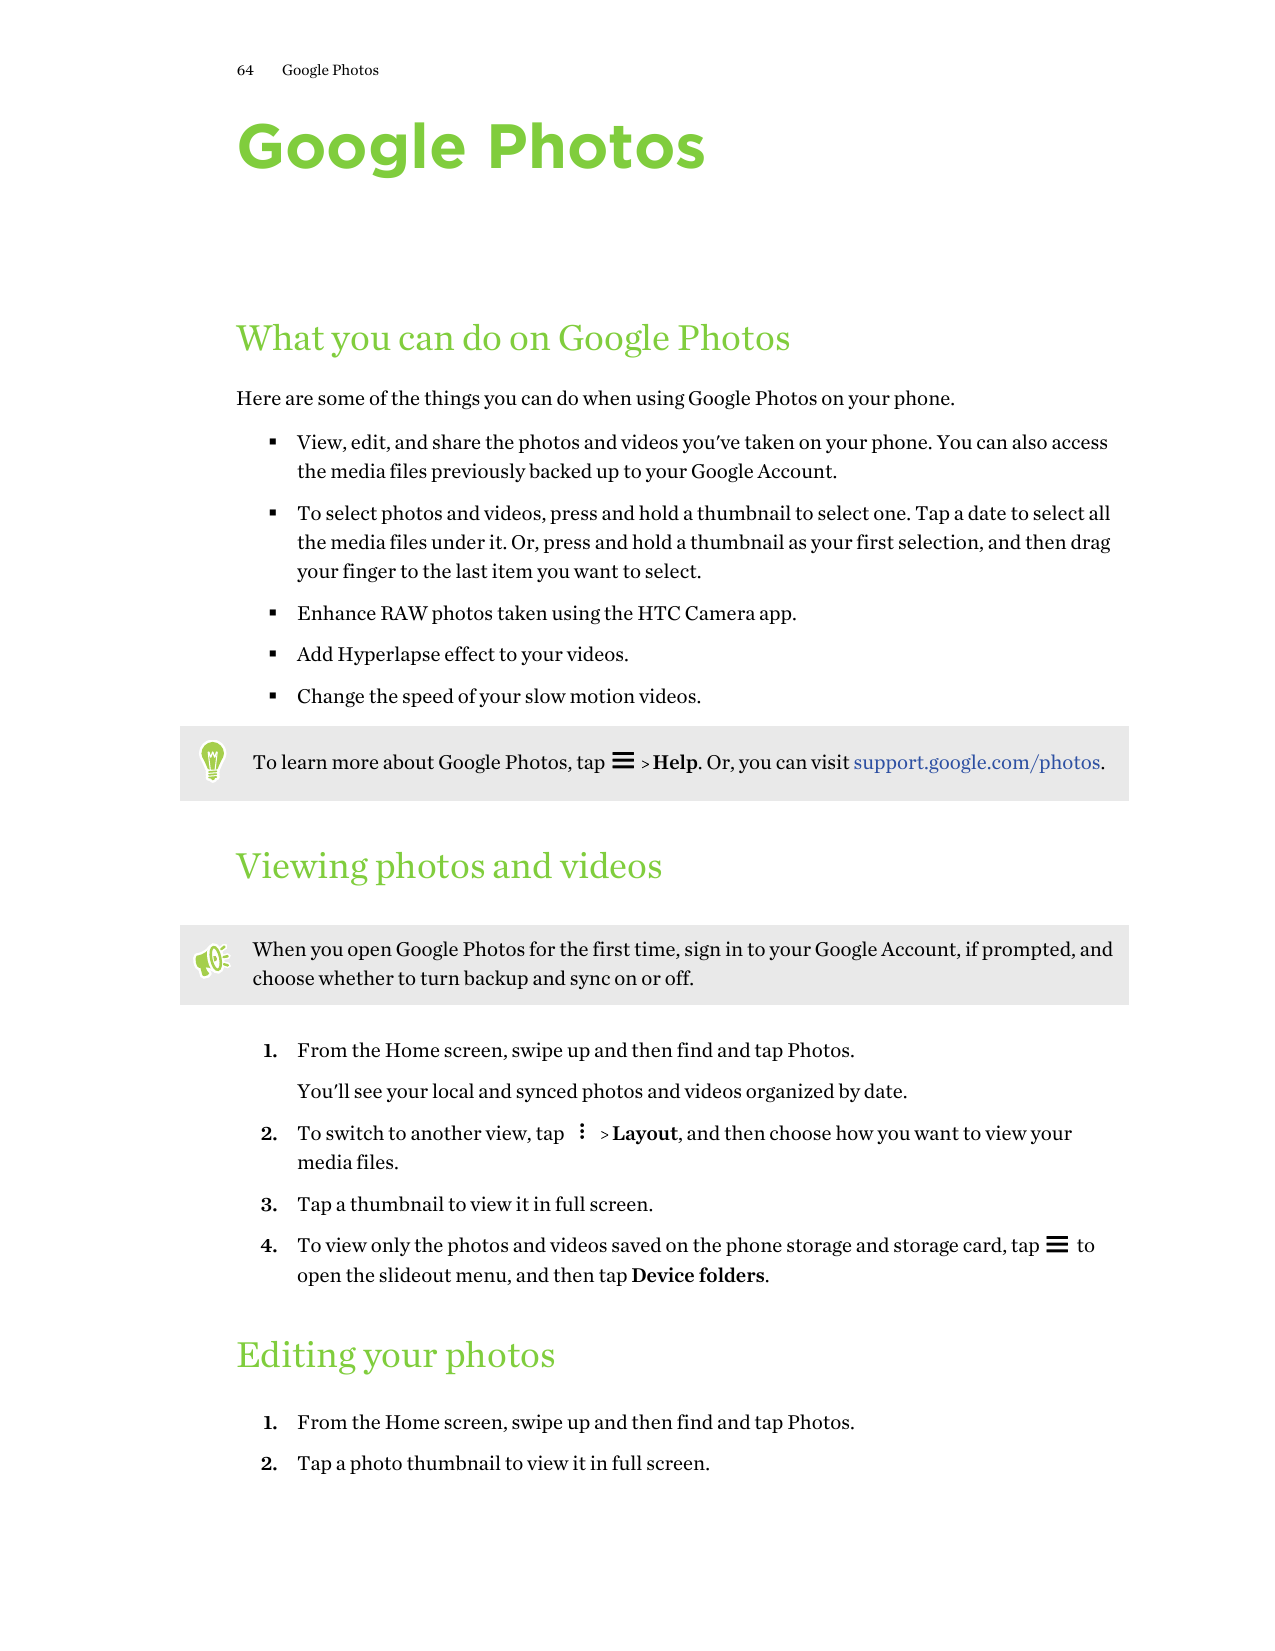 64Google PhotosGoogle PhotosWhat you can do on Google PhotosHere are some of the things you can do when using Google Photos on y